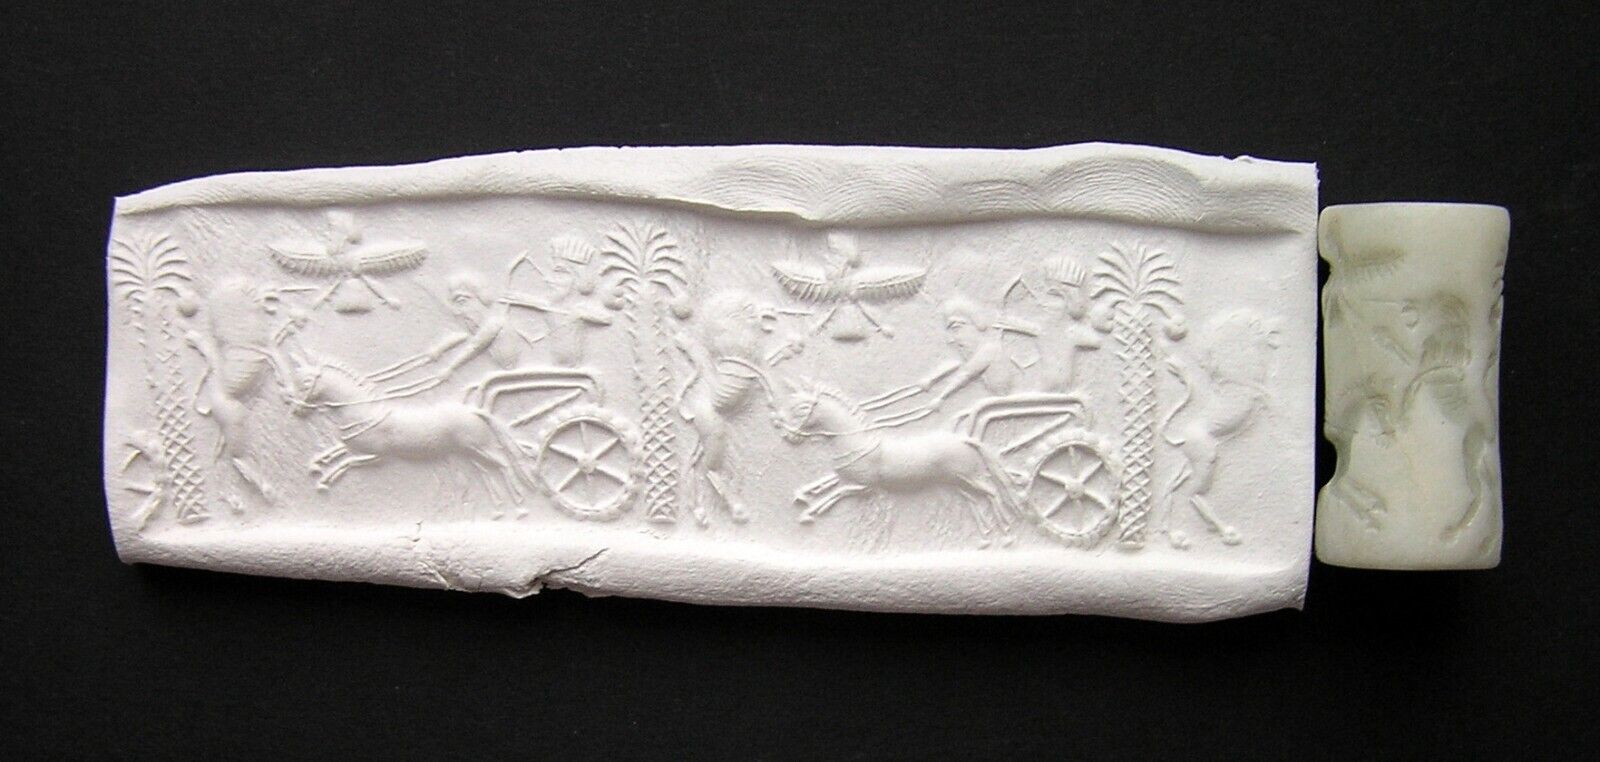 Extremely Rare Ancient Near Eastern Cylinder Seal